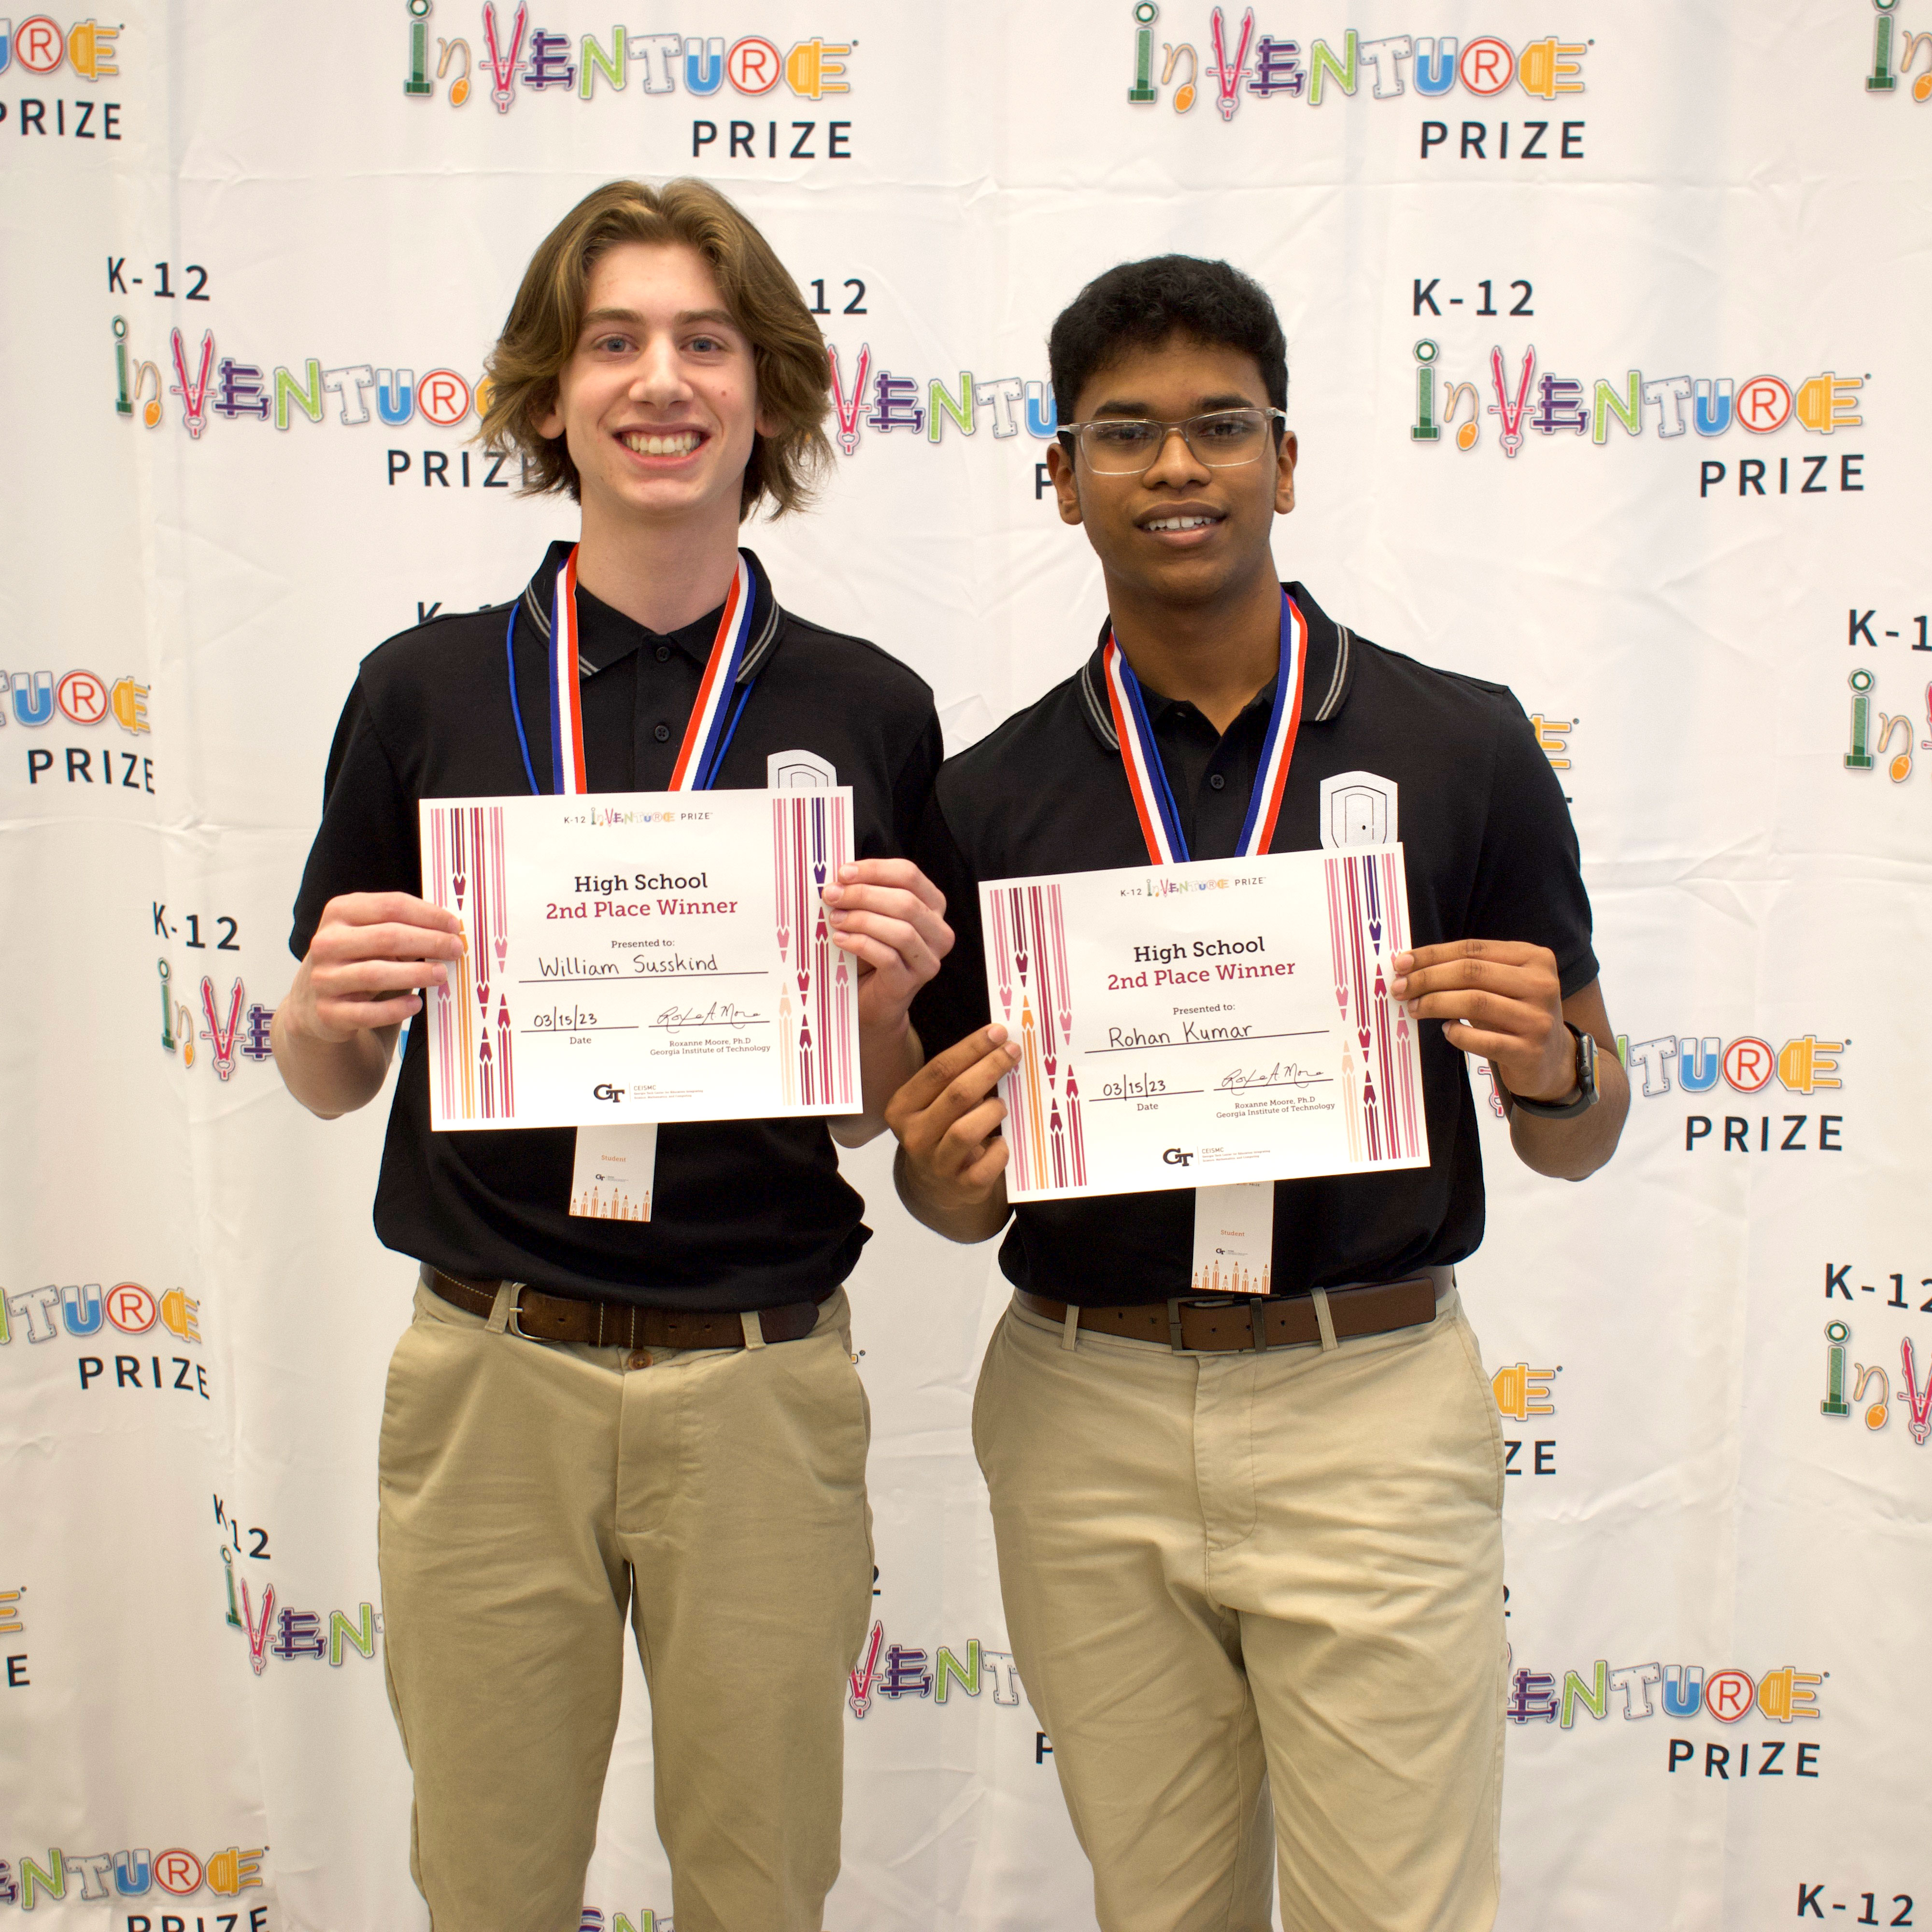 Two smiling students holding up certificates